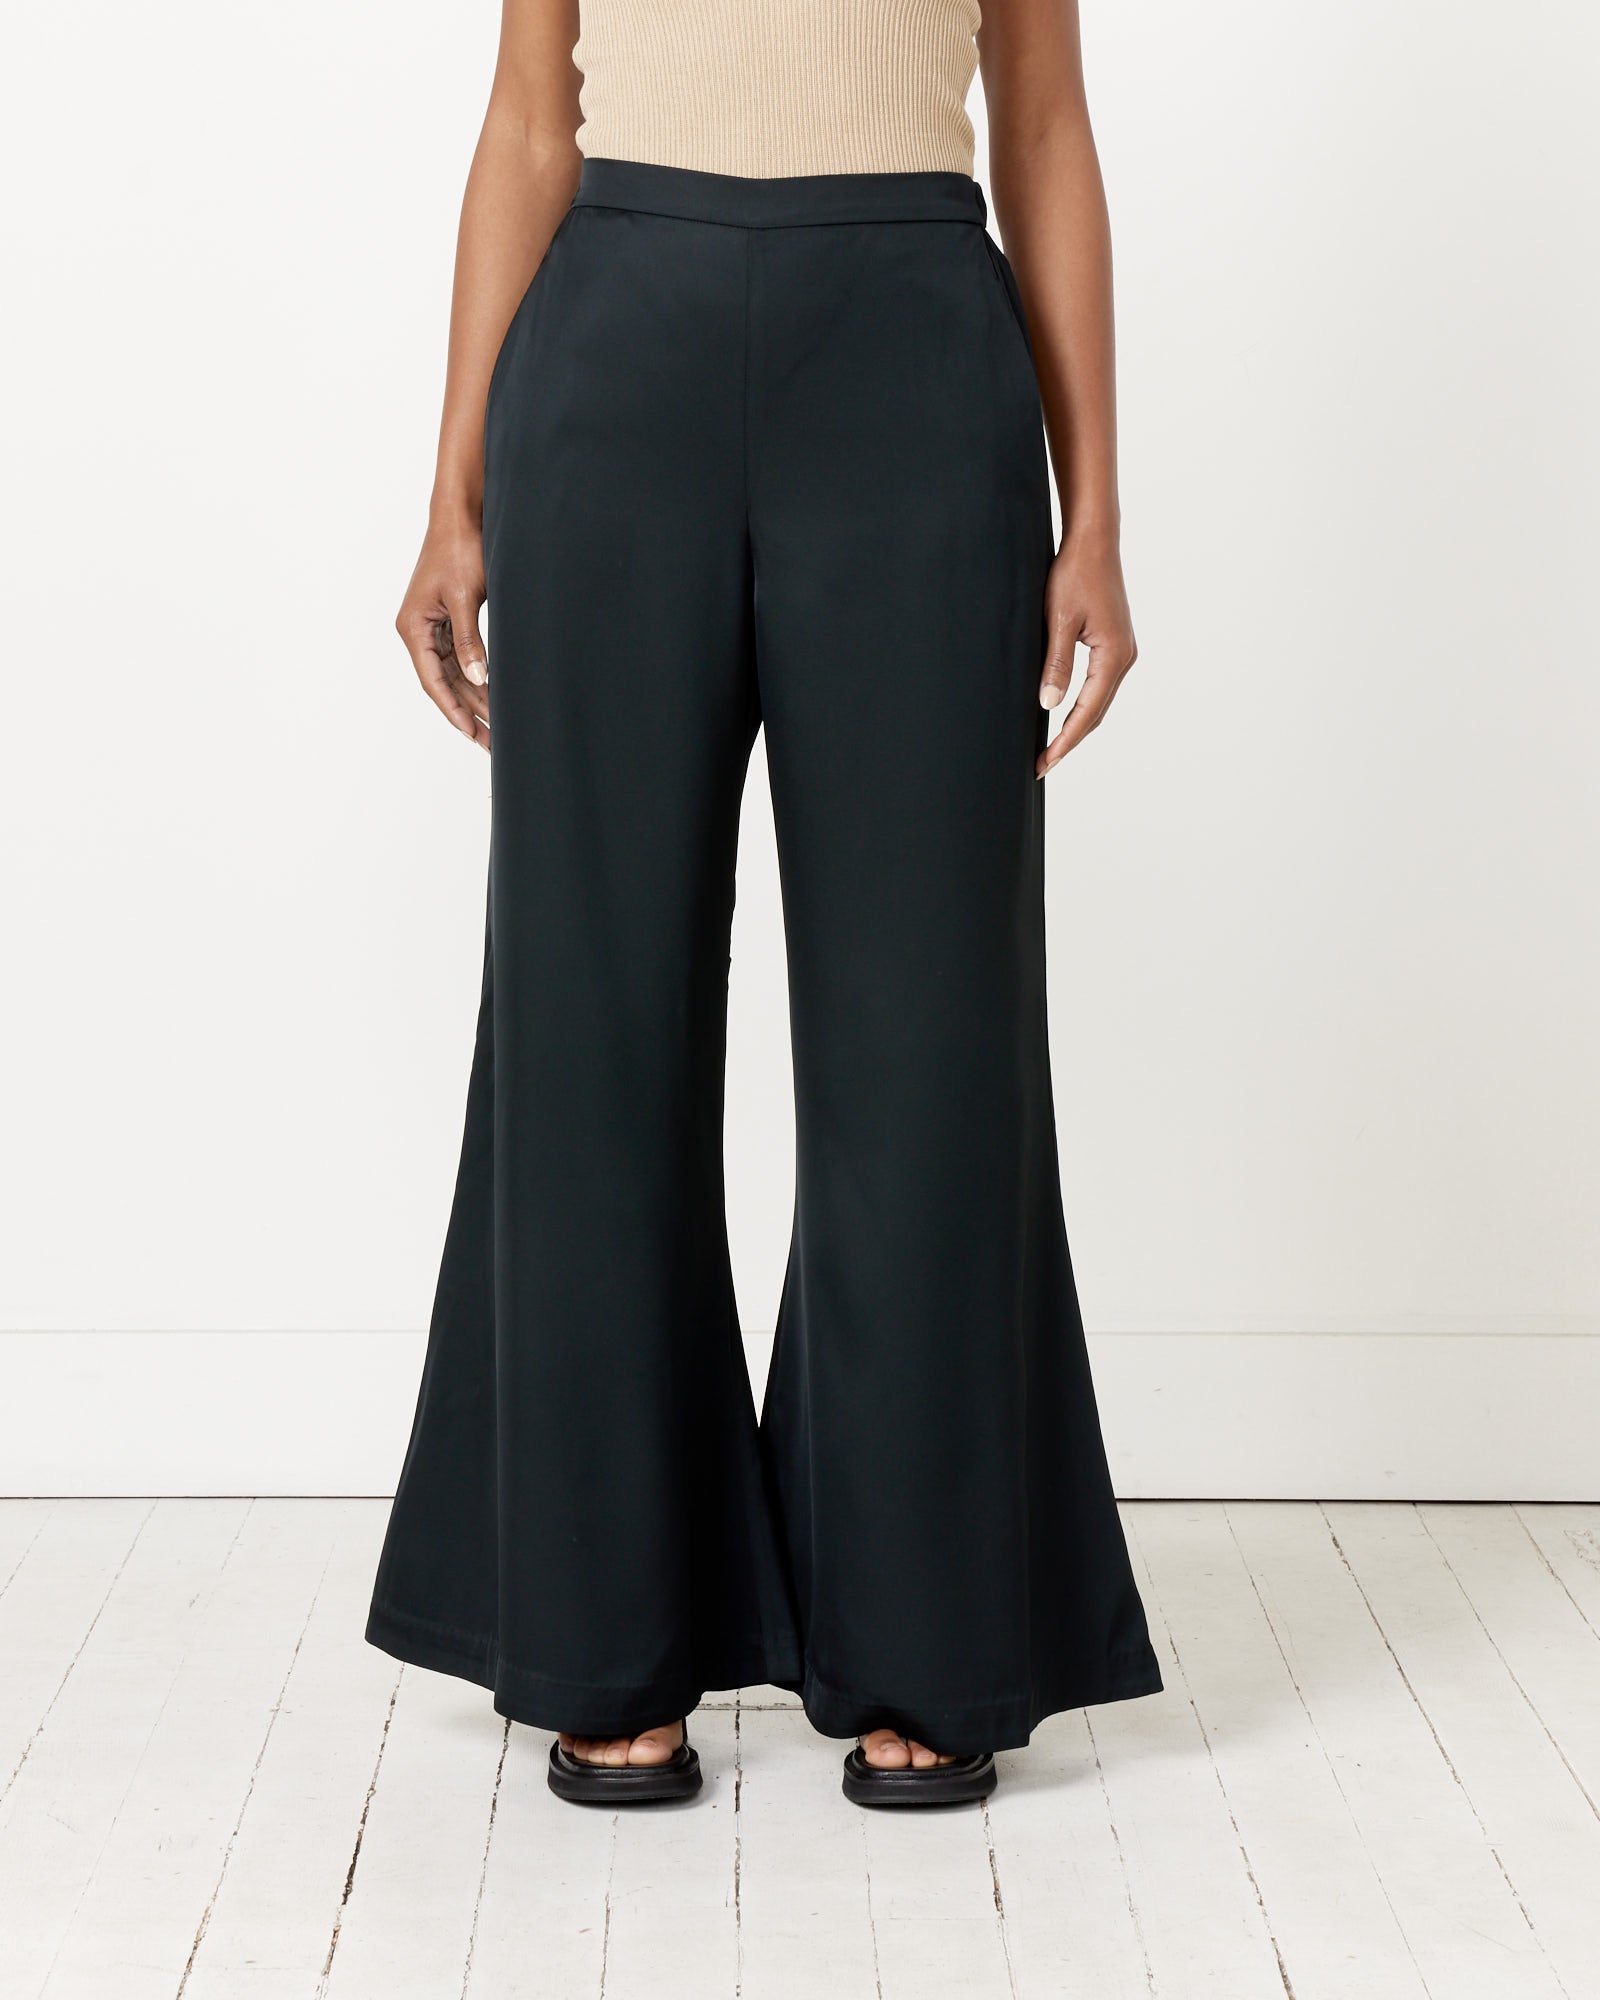 Lucee Pant in Black